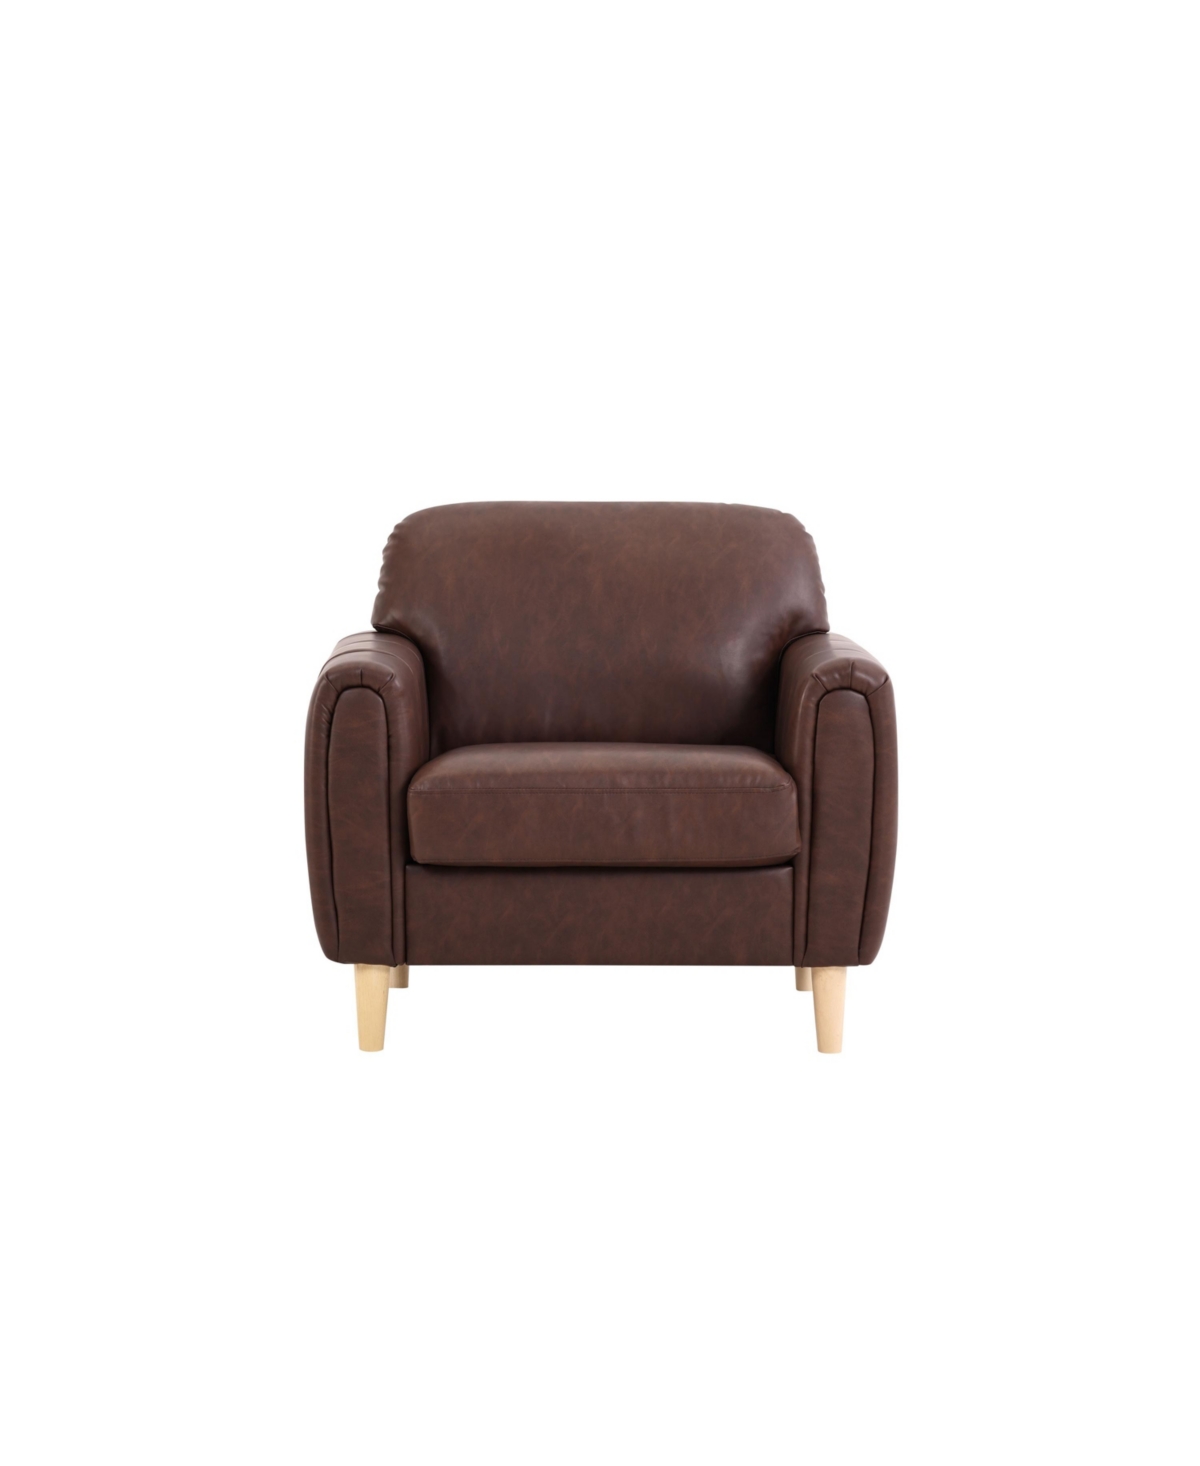 Serta 37.8" Faux Leather Gorm Accent Chair In Brown